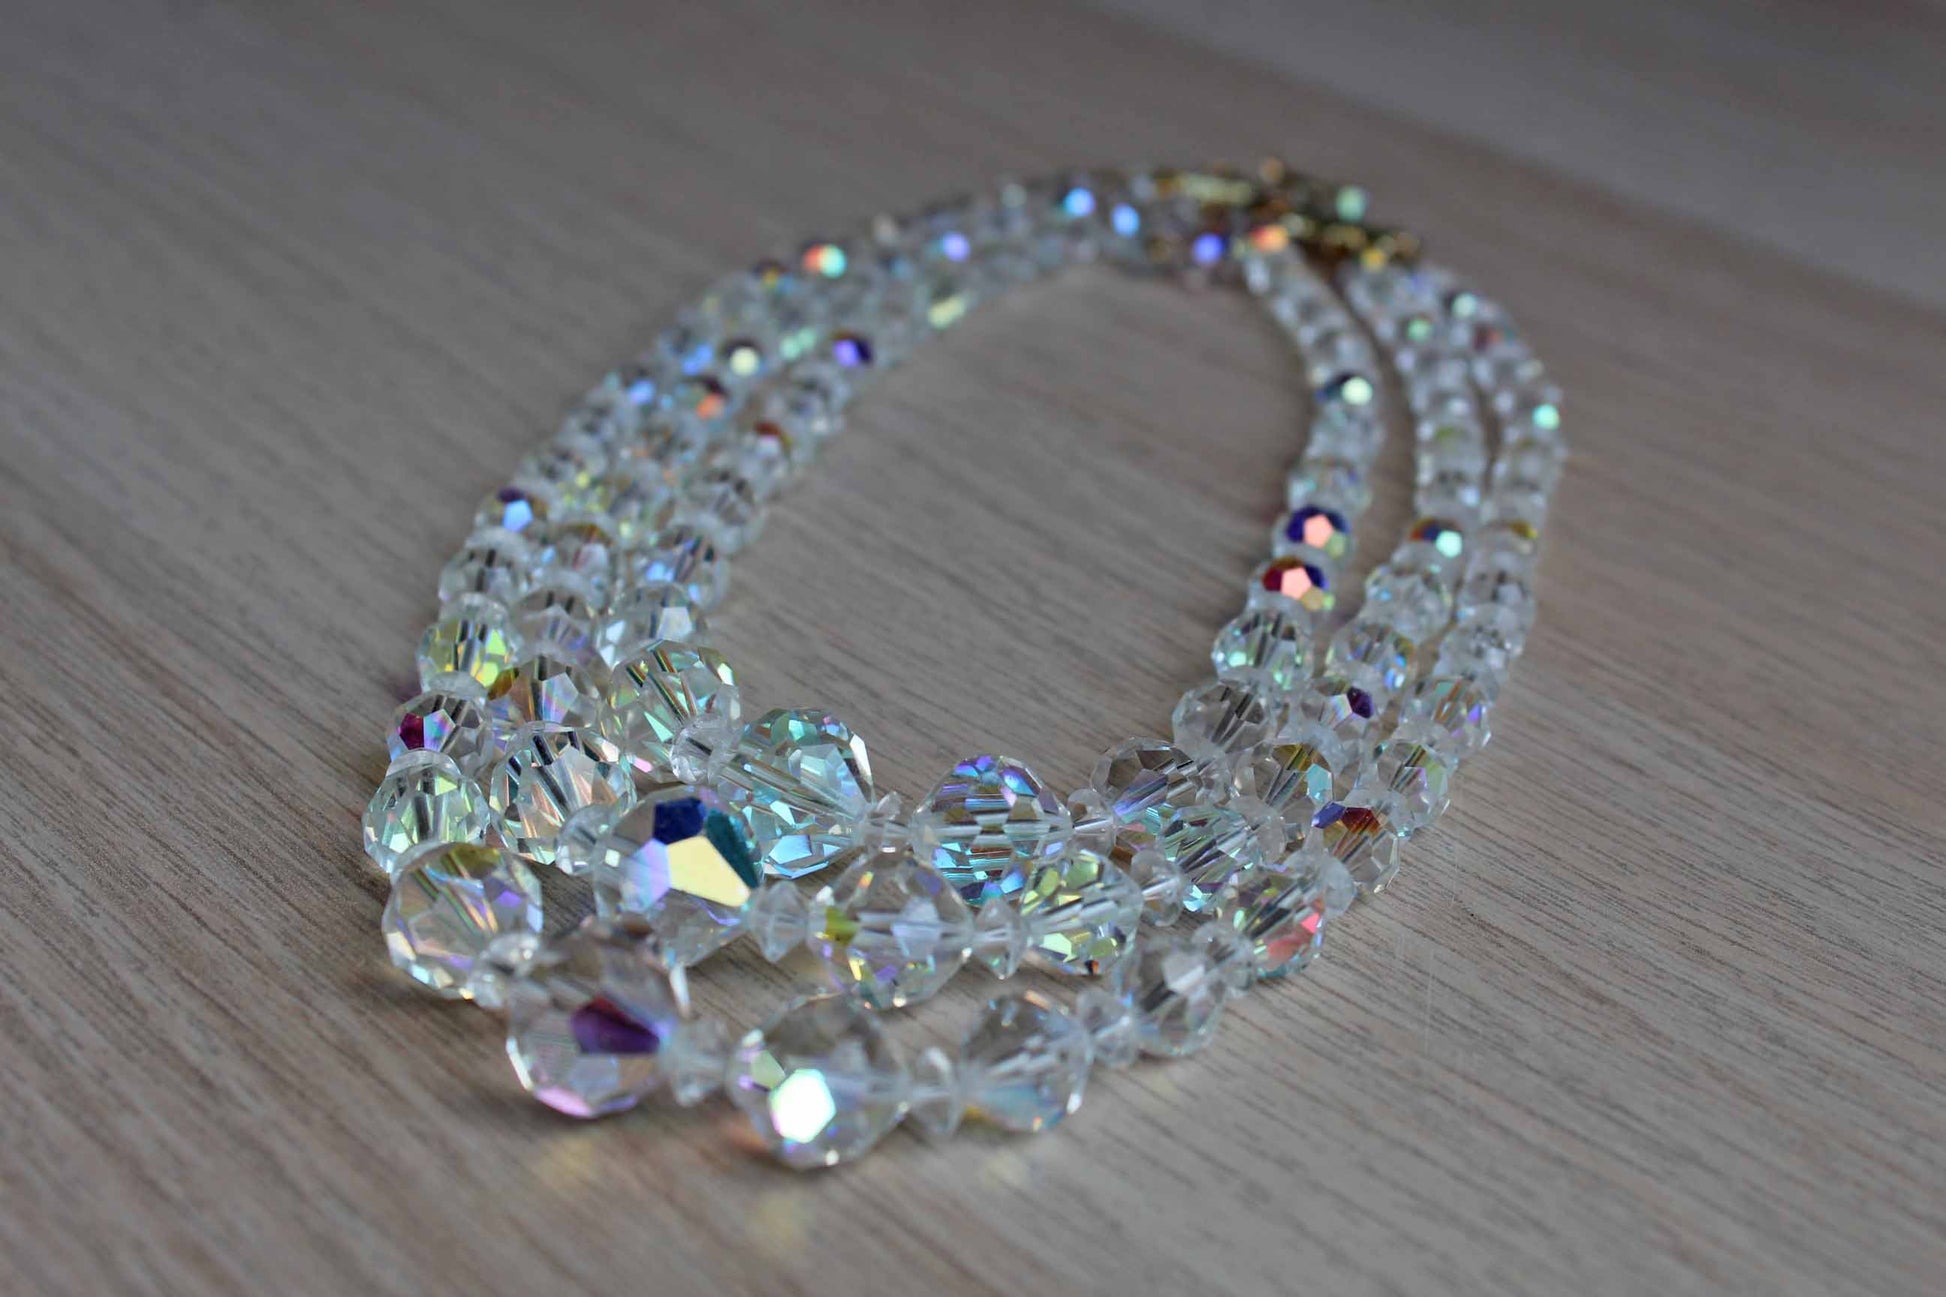 20mm Glass Crystal in Aurora Borealis, faceted crystals for